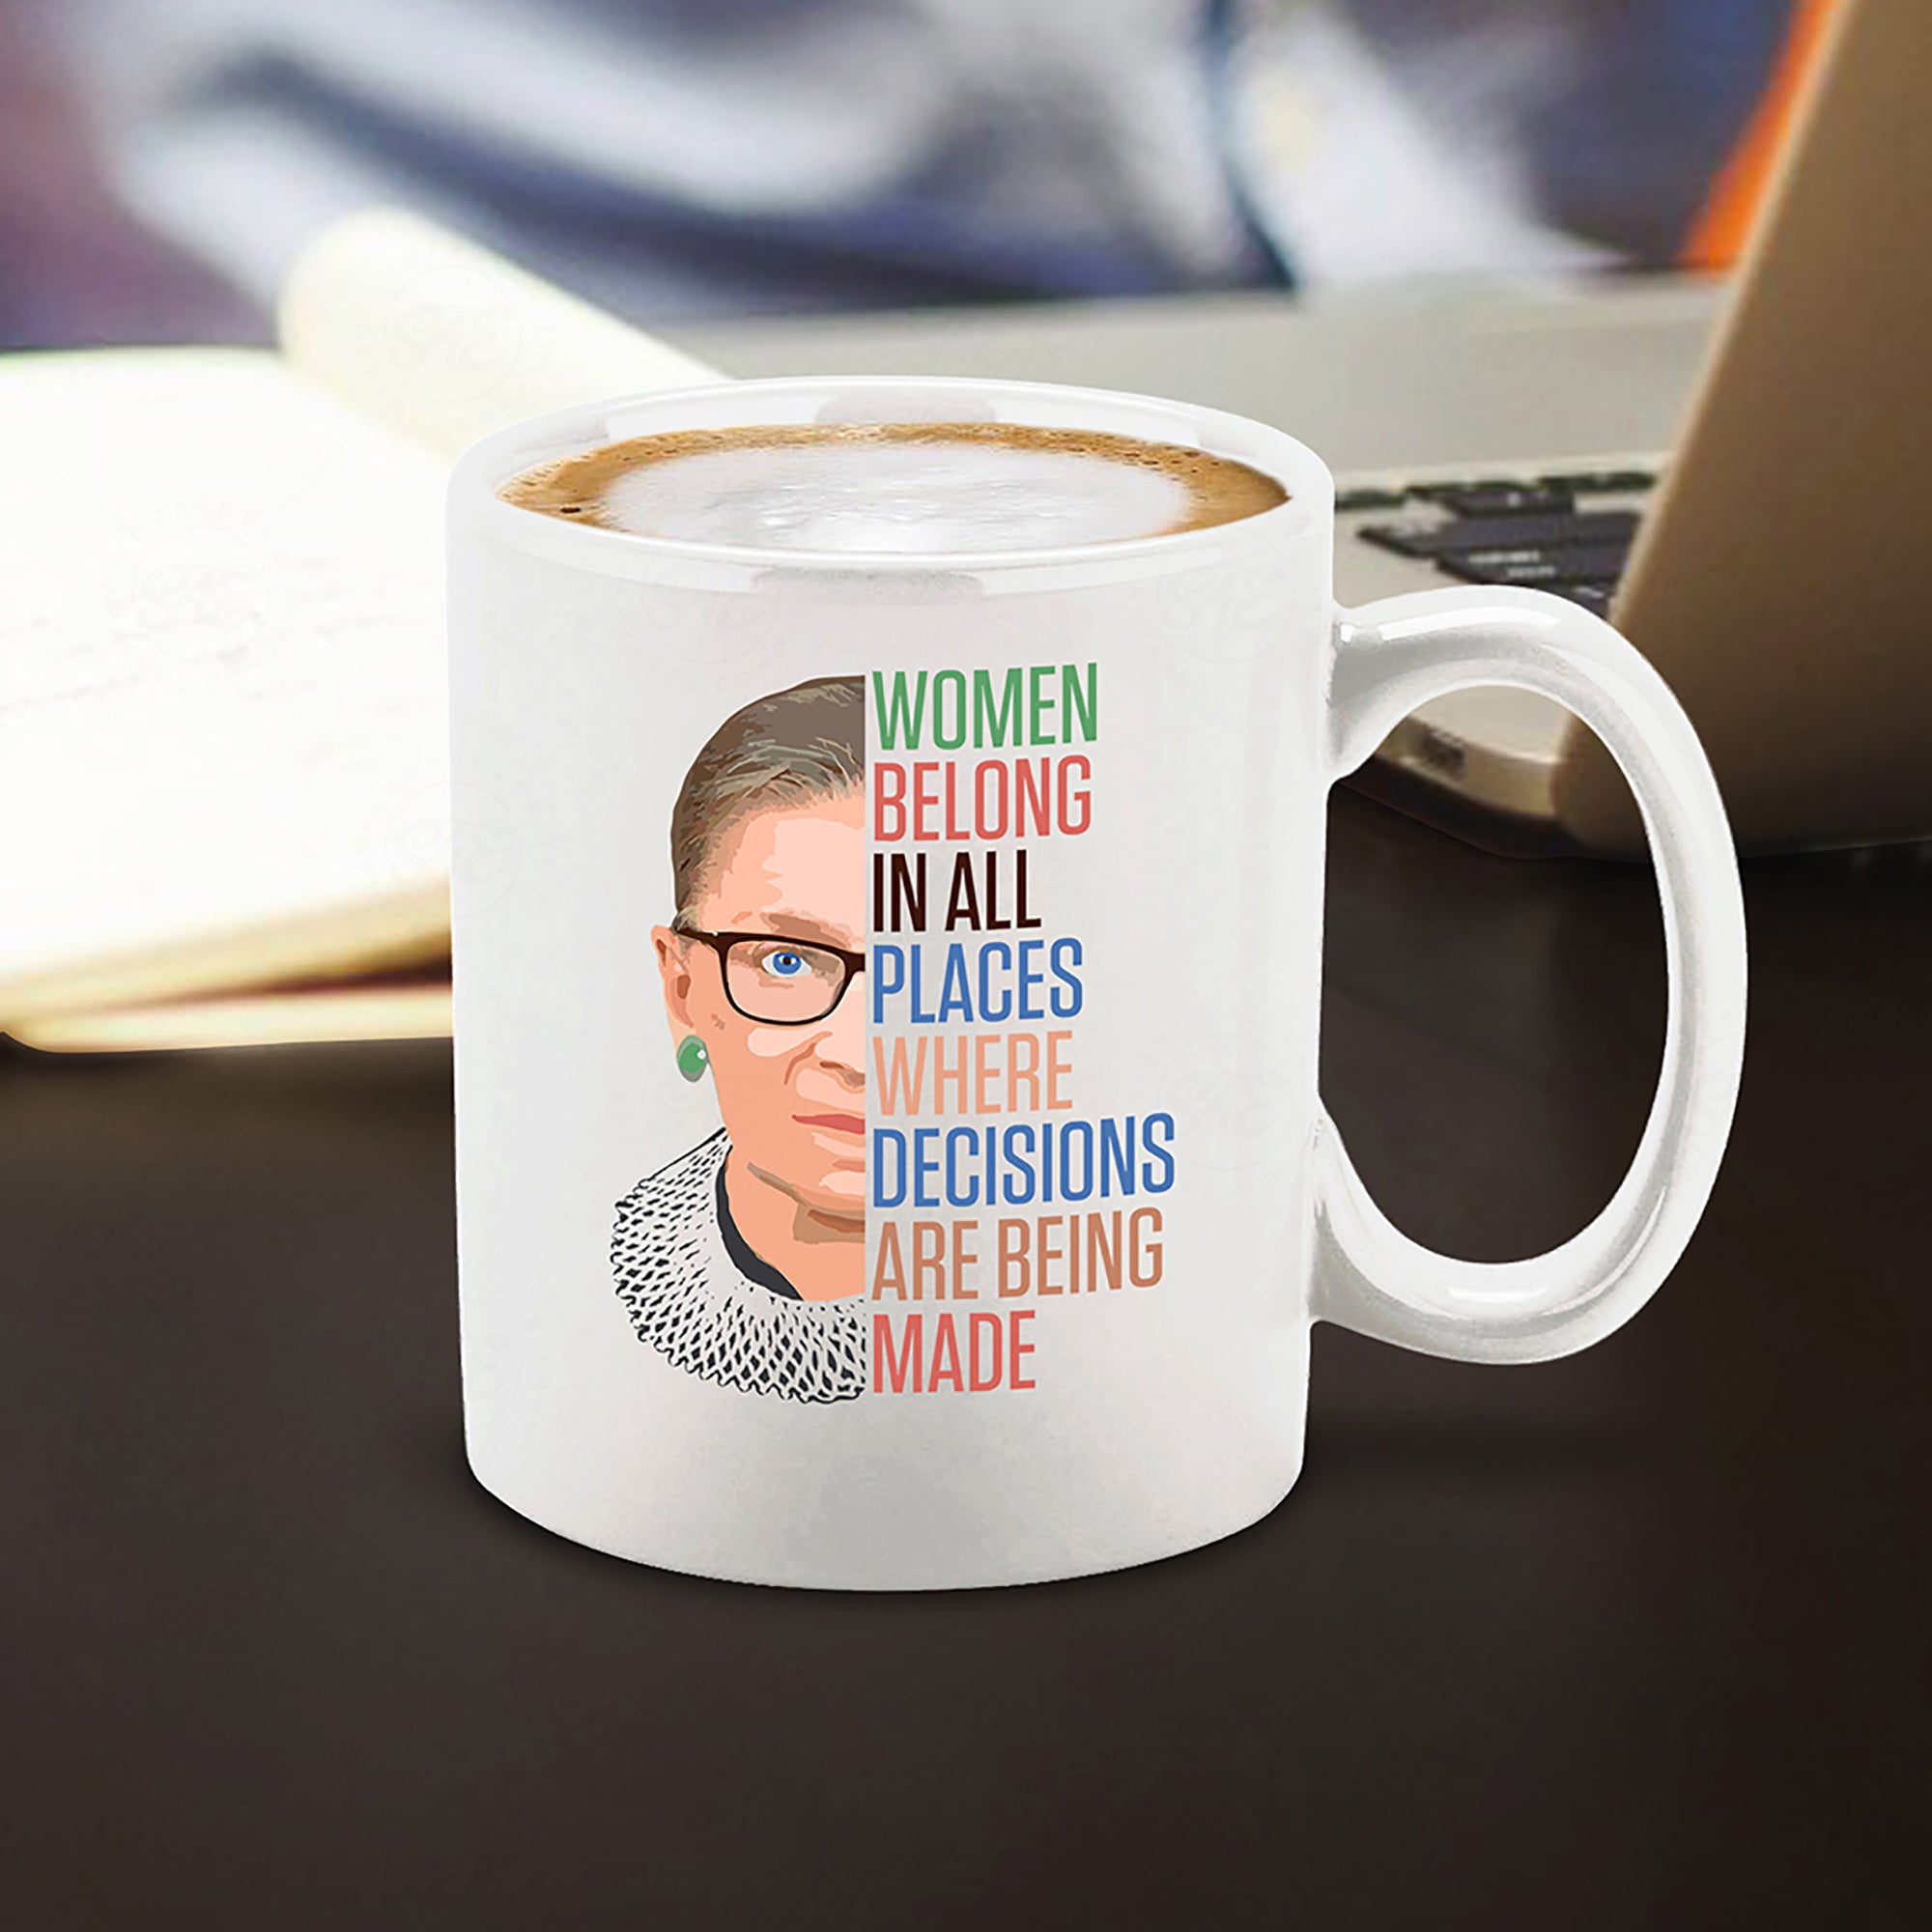 Women Belong In All Places Where Decisions Are Being Made Ceramic Coffee Mug Tea Cup RBG Gift Ruth Bader Ginsburg Mug (Colorful)